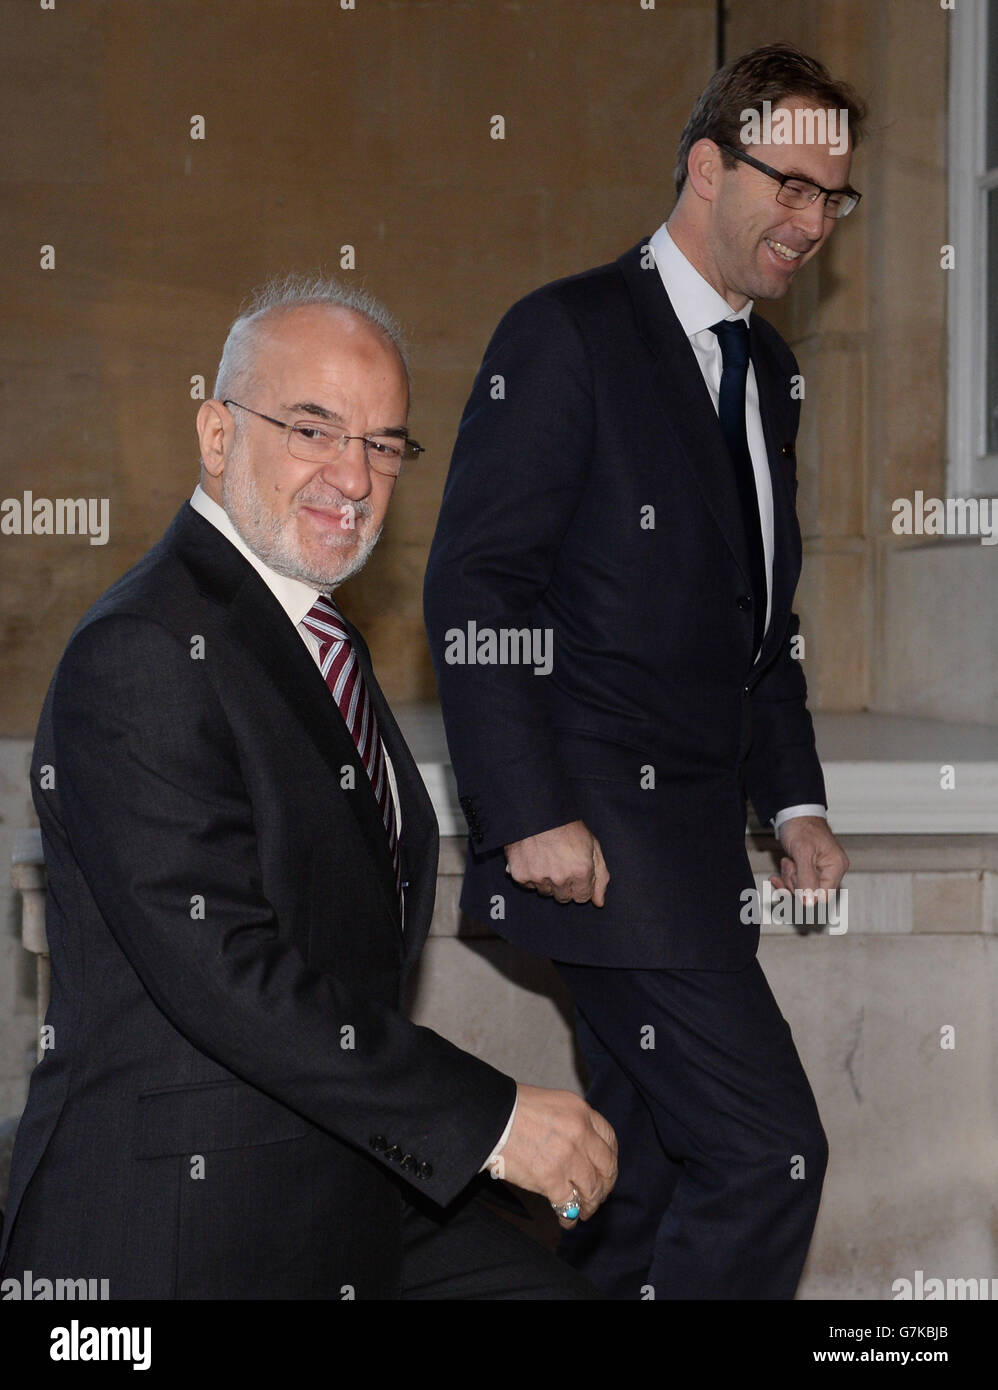 Iraqi foreign minister Ibrahim al-Jaafari (left) arrives at Lancaster House in London to attend the Small Group of the Global Coalition to Counter ISIL one day meeting, hosted by British foreign secretary Philip Hammond. Stock Photo